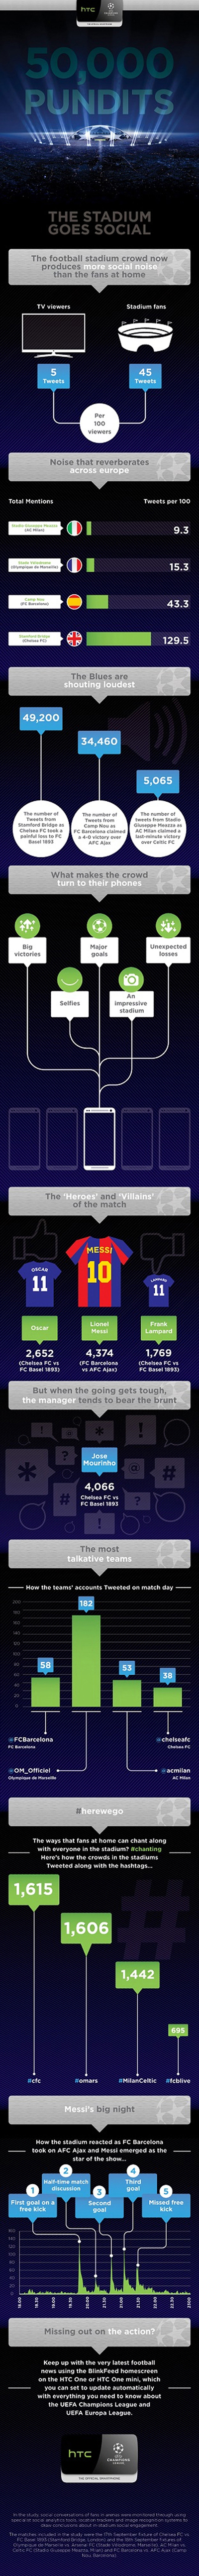 MD493_UEFA_Infographic_12